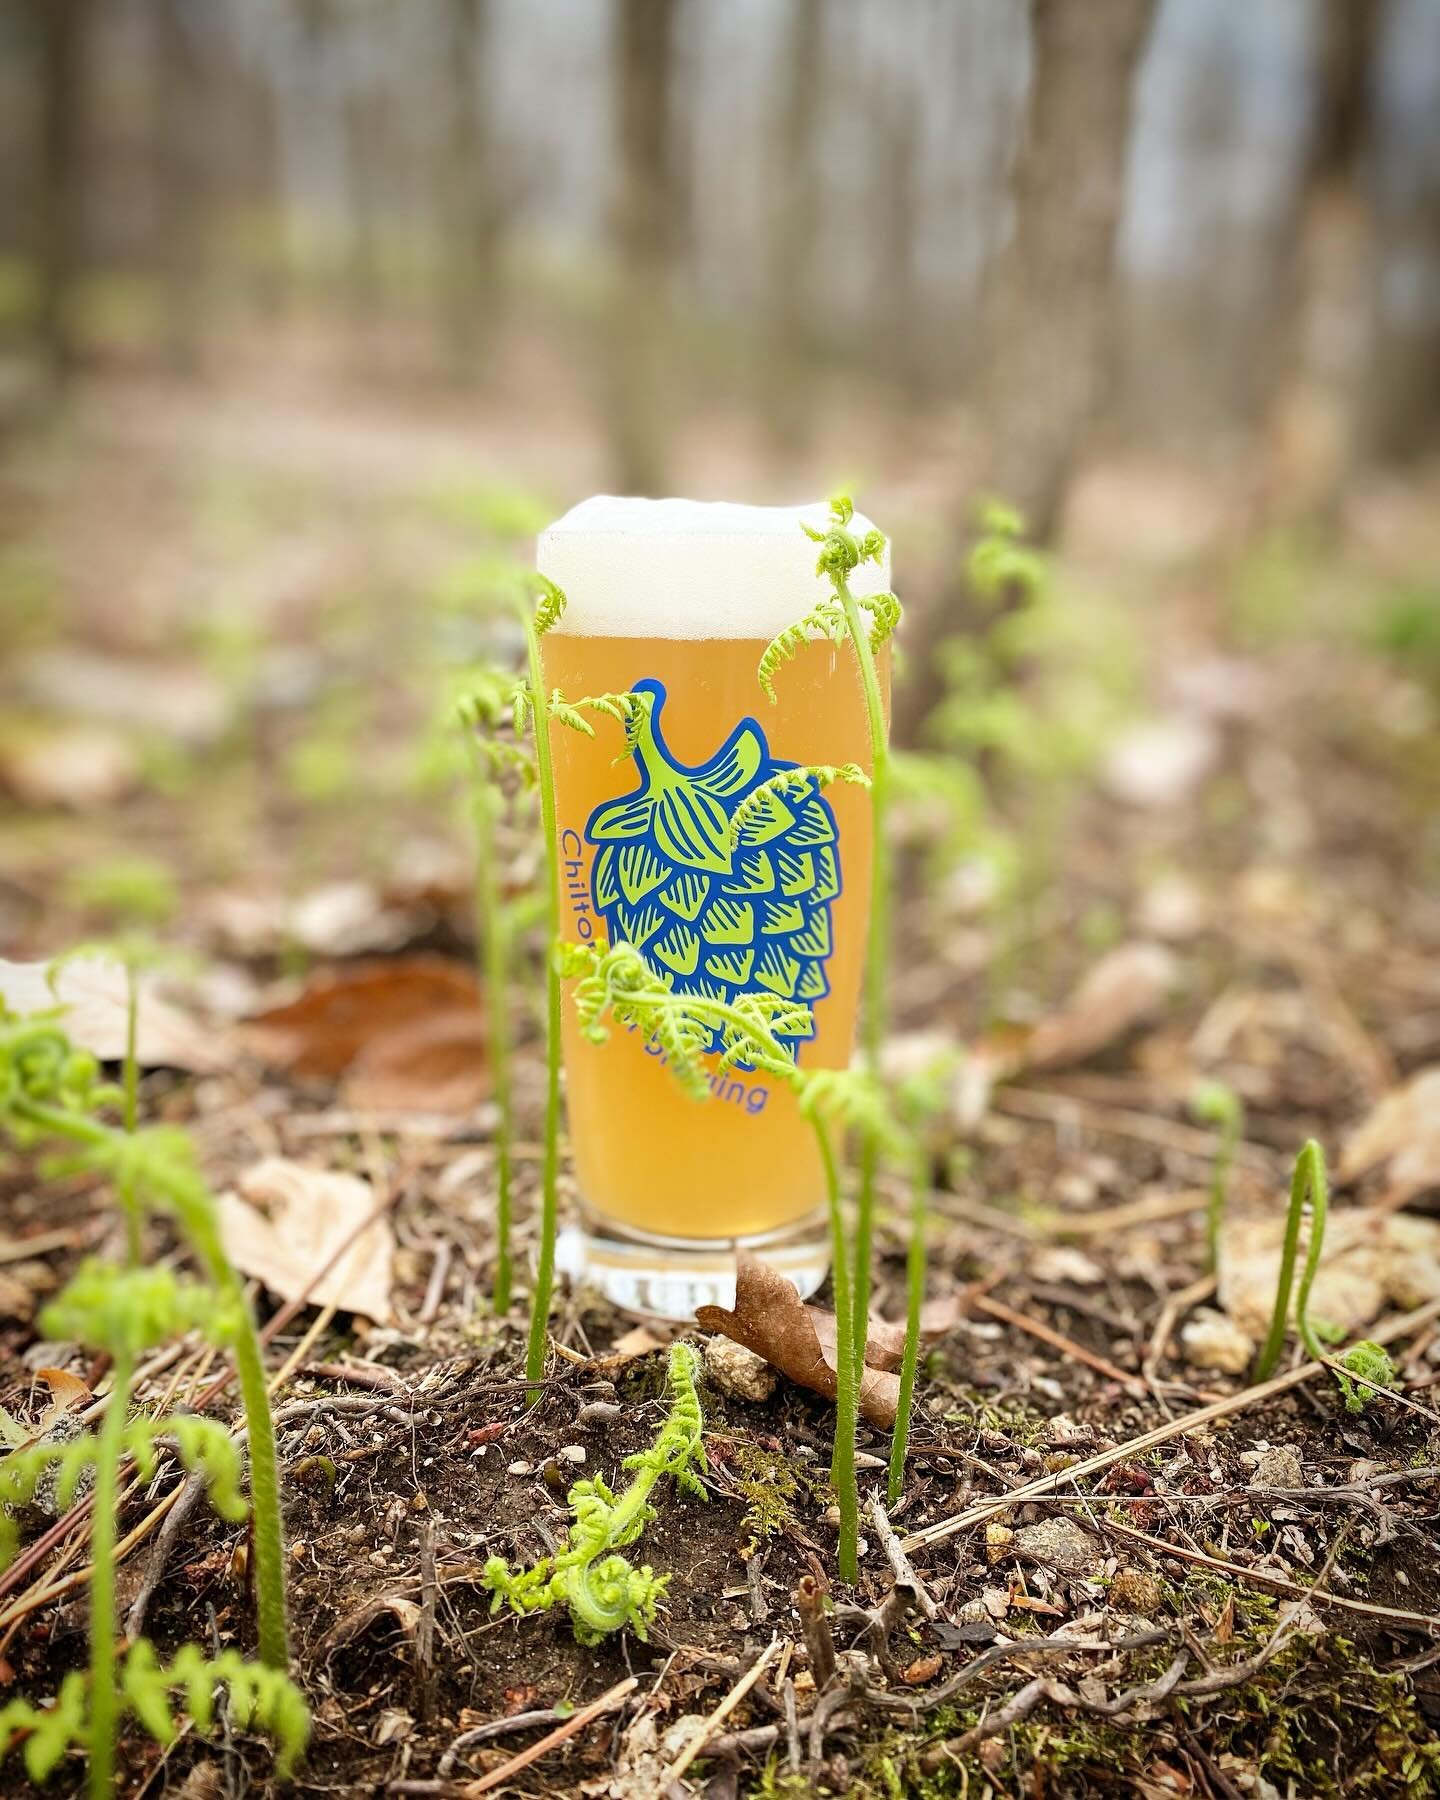 Spring is here and it&rsquo;s a perfect day for a New Pale Ale on the patio!

&Aacute;vido - Pale Ale: 5.3% ABV 

Ripe refreshing layers of strawberry, honey dew melon and marmalade meander throughout this petite pale courtesy of Citra, Strata &amp; 